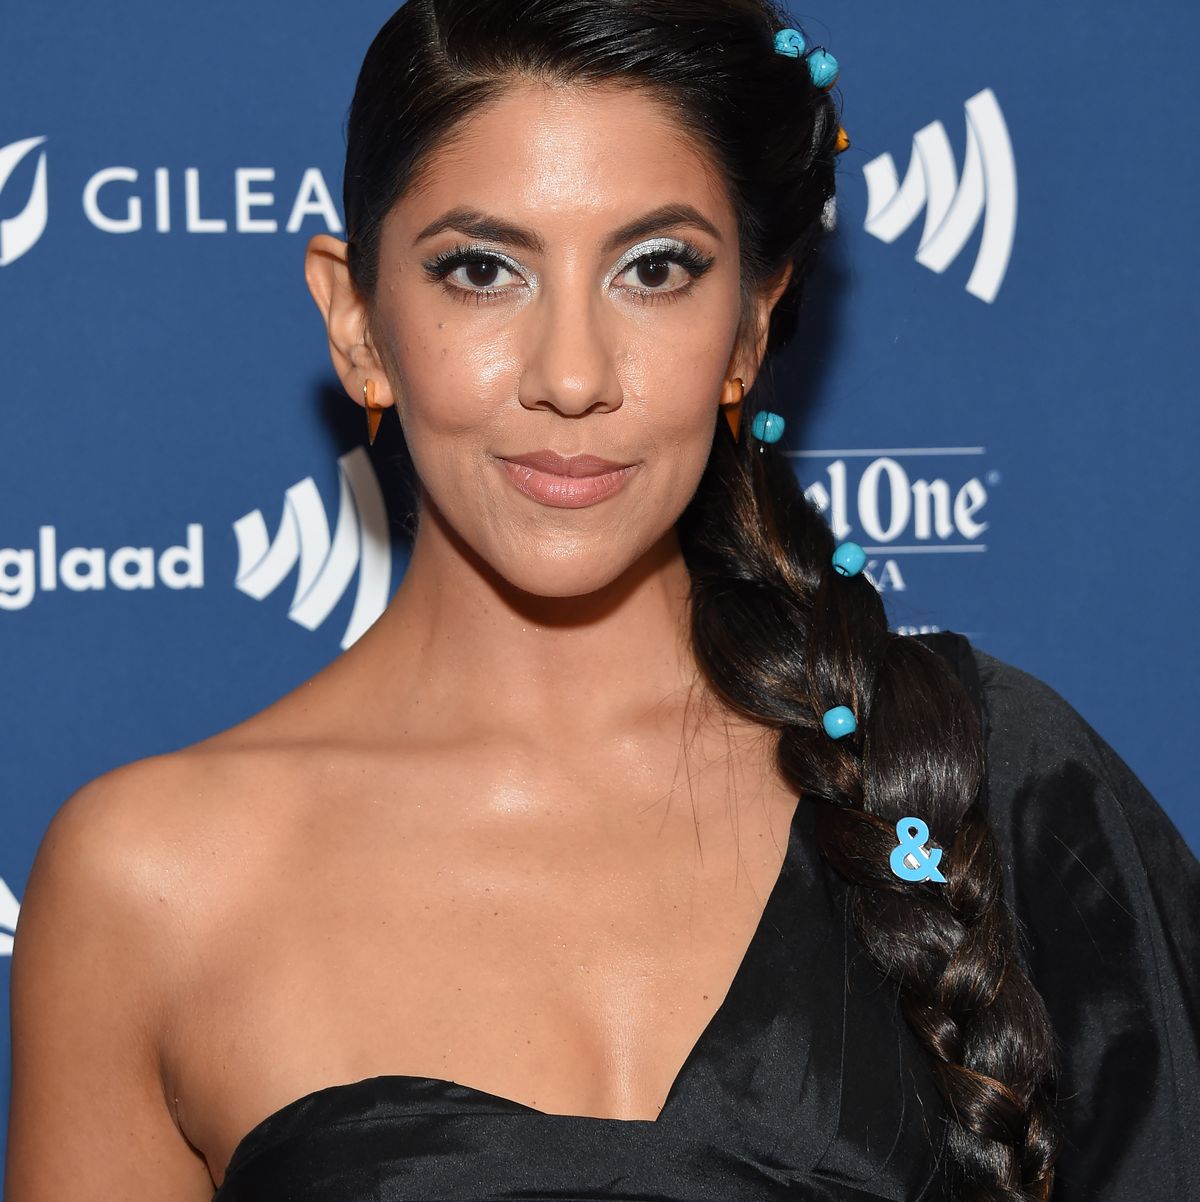 Stephanie beatriz says in the heights showcases the richness of the latinx ...